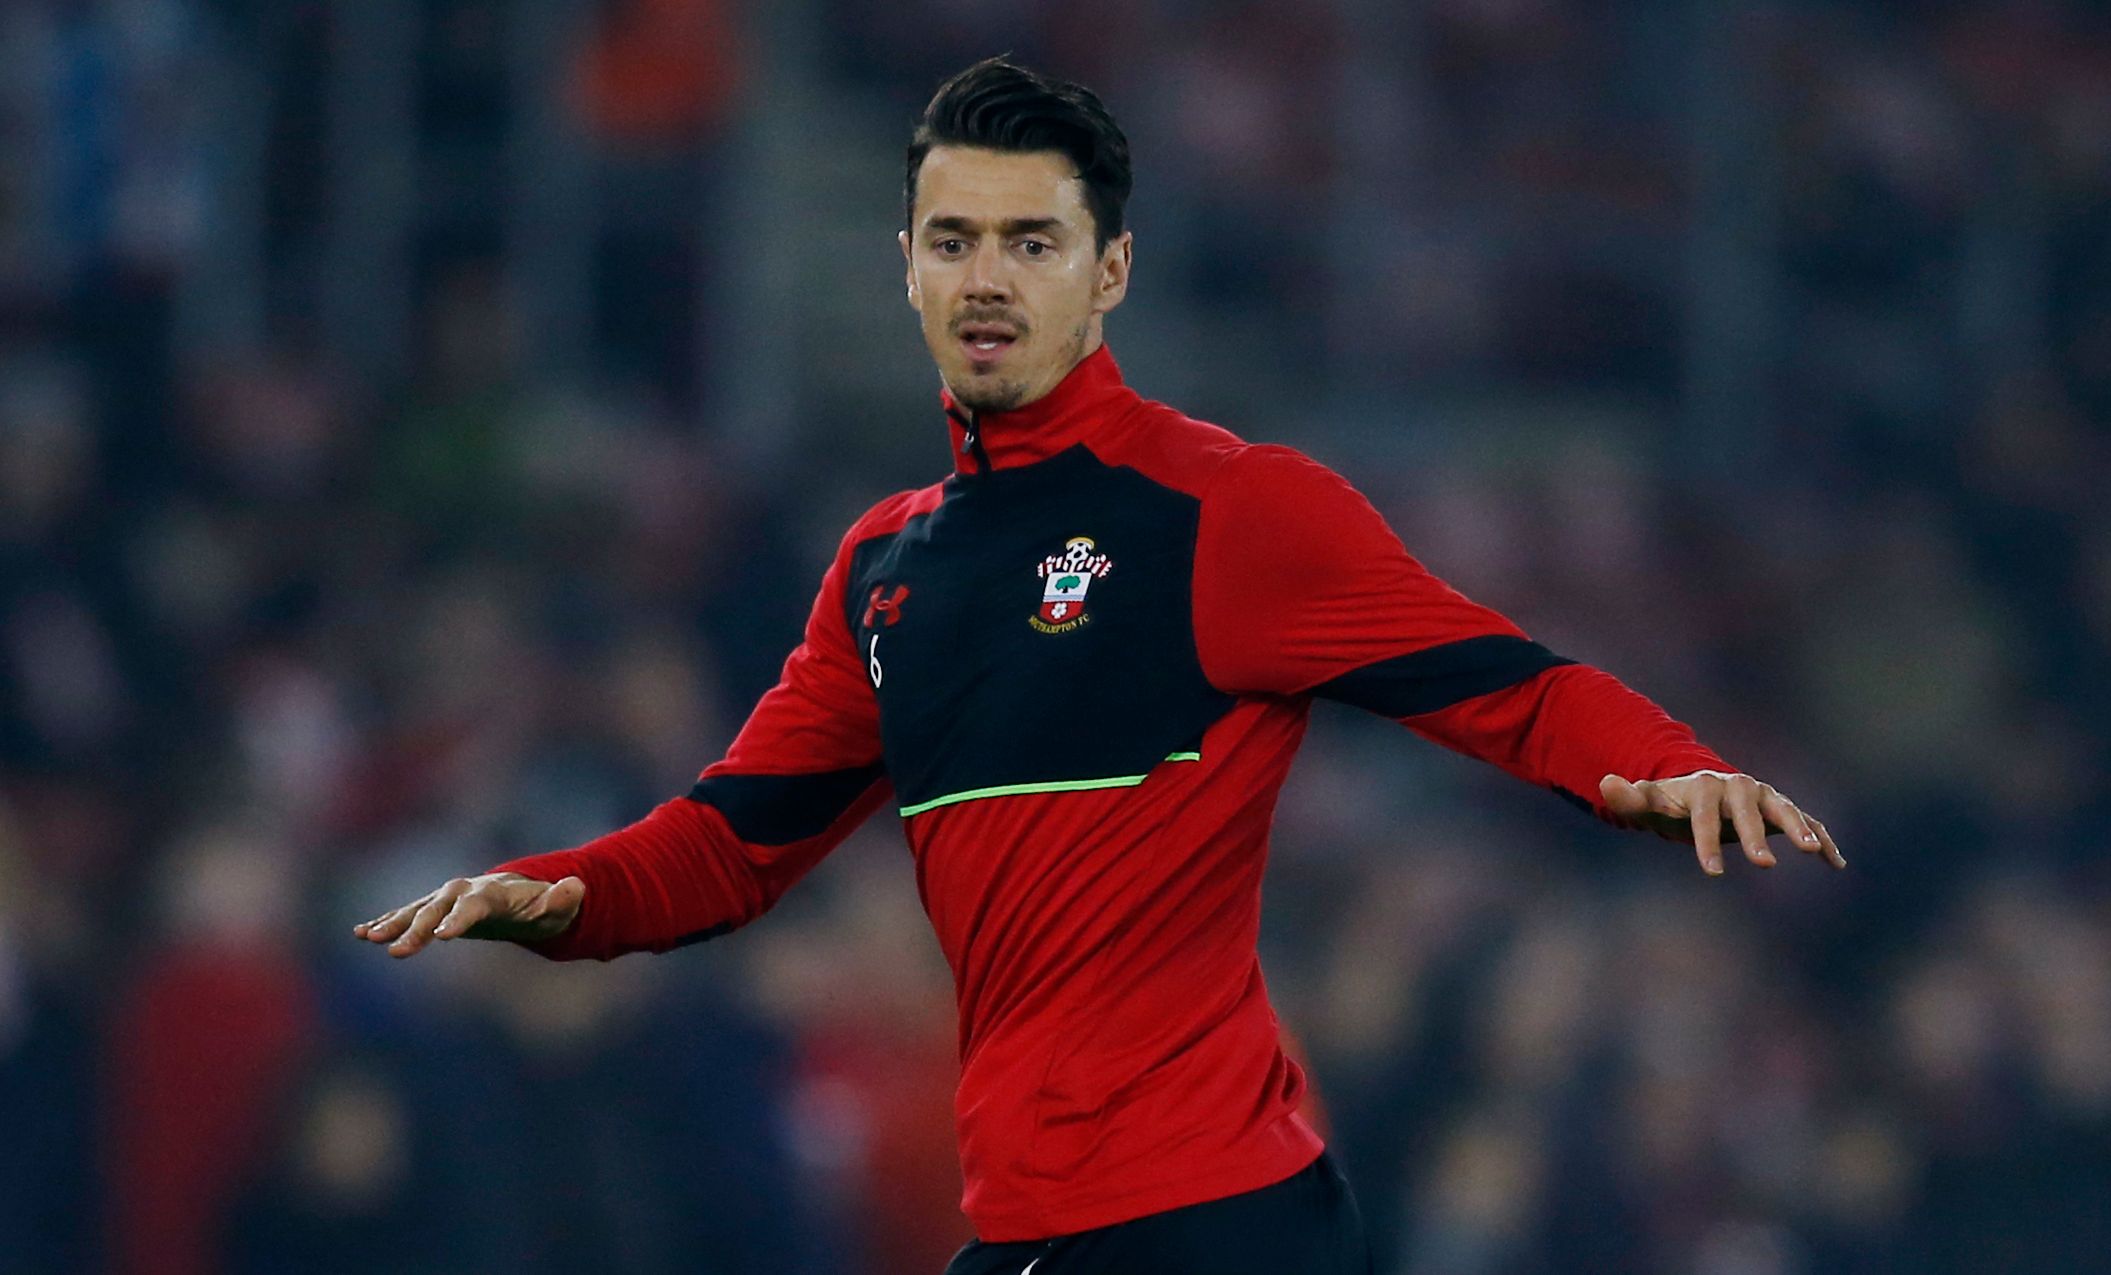 Britain Soccer Football - Southampton v Hapoel Be'er Sheva - UEFA Europa League Group Stage - Group K - St Mary's Stadium, Southampton, England - 8/12/16 Southampton's Jose Fonte during the warm up before the match Action Images via Reuters / Paul Childs Livepic EDITORIAL USE ONLY.